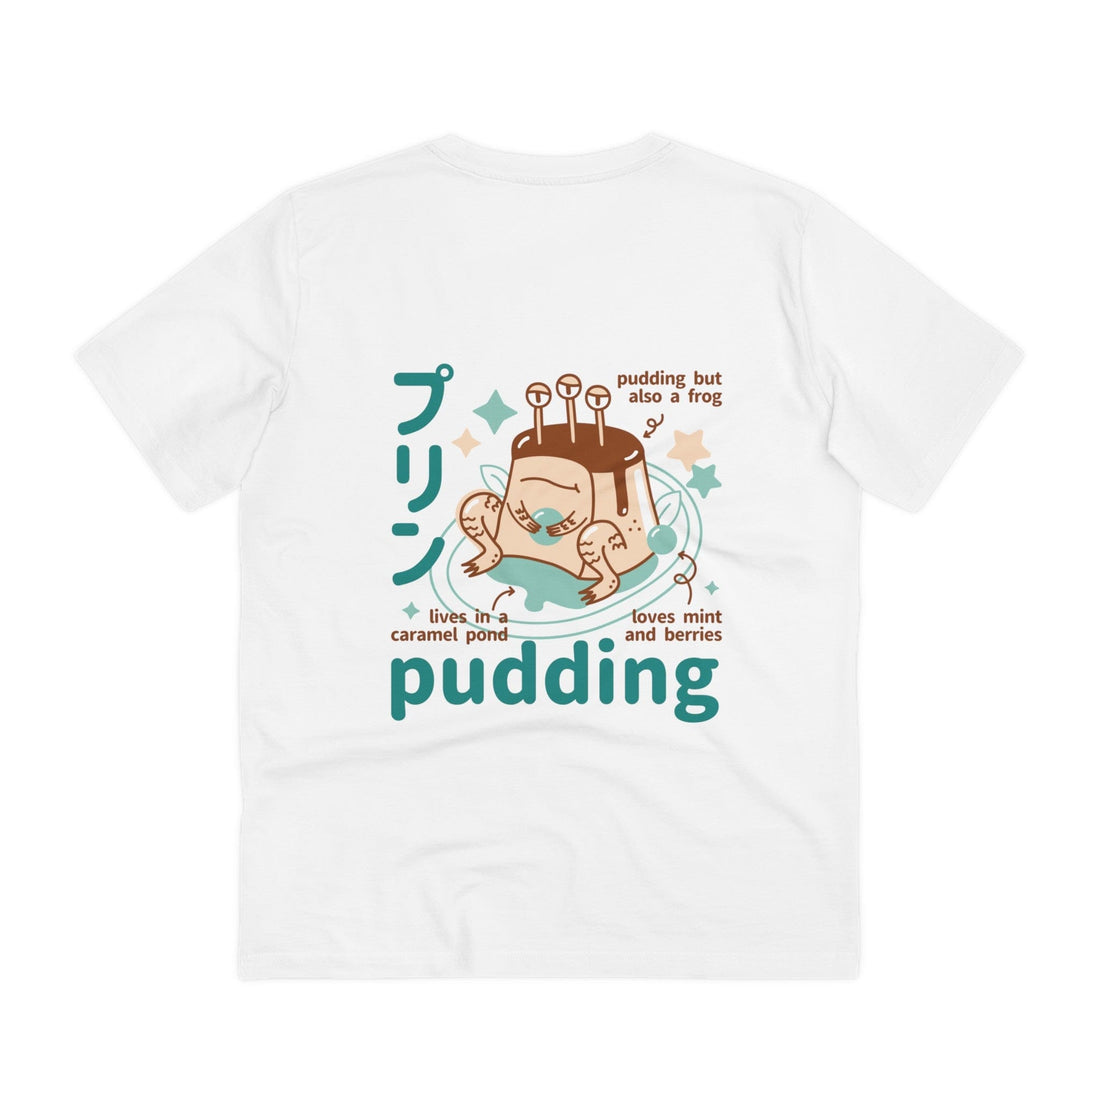 Printify T-Shirt White / 2XS Awesome Pudding Monster - Cute Japanes Dessert Monsters - Back Design